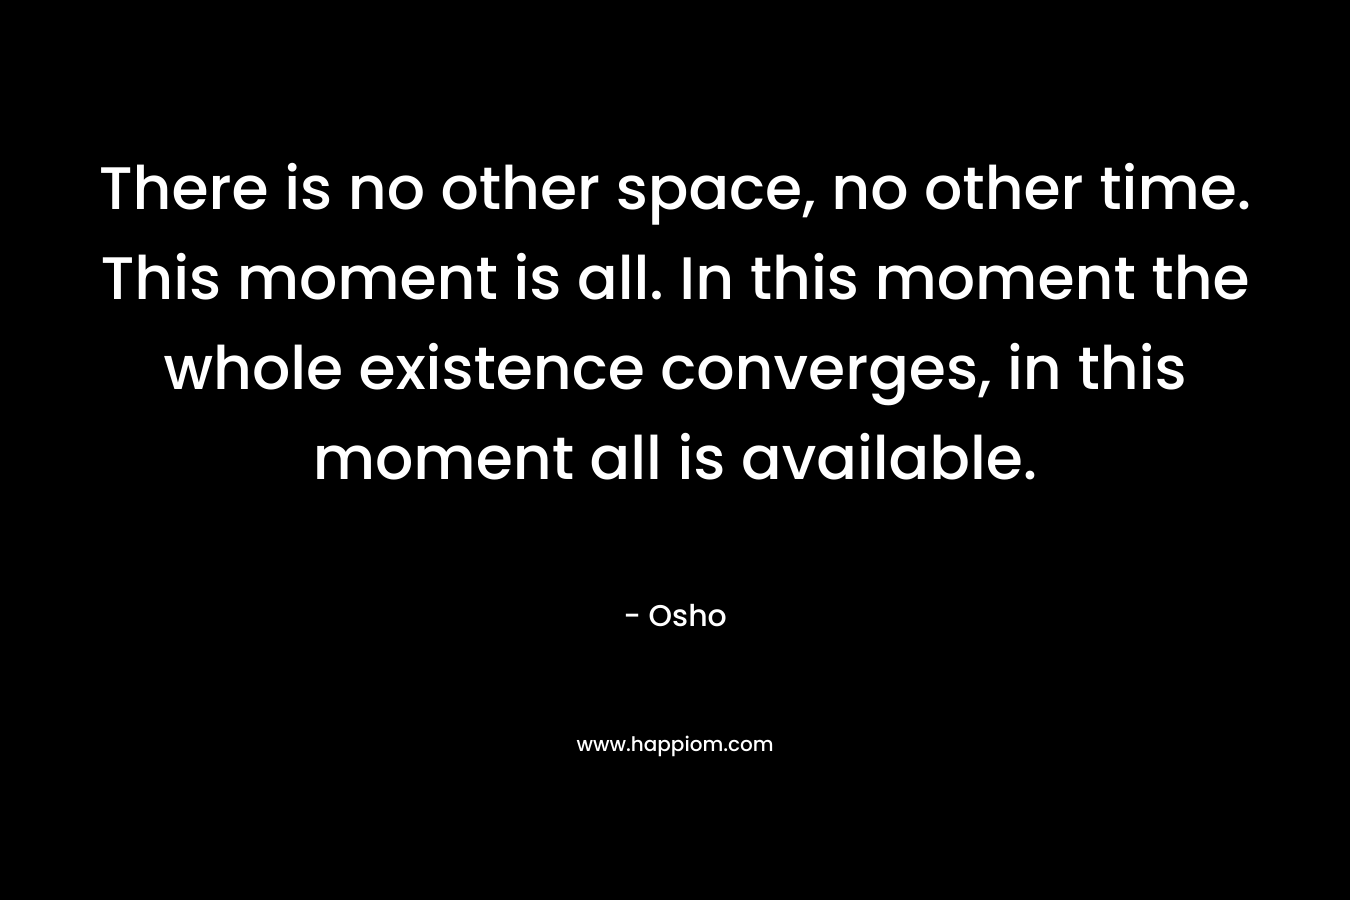 There is no other space, no other time. This moment is all. In this moment the whole existence converges, in this moment all is available.